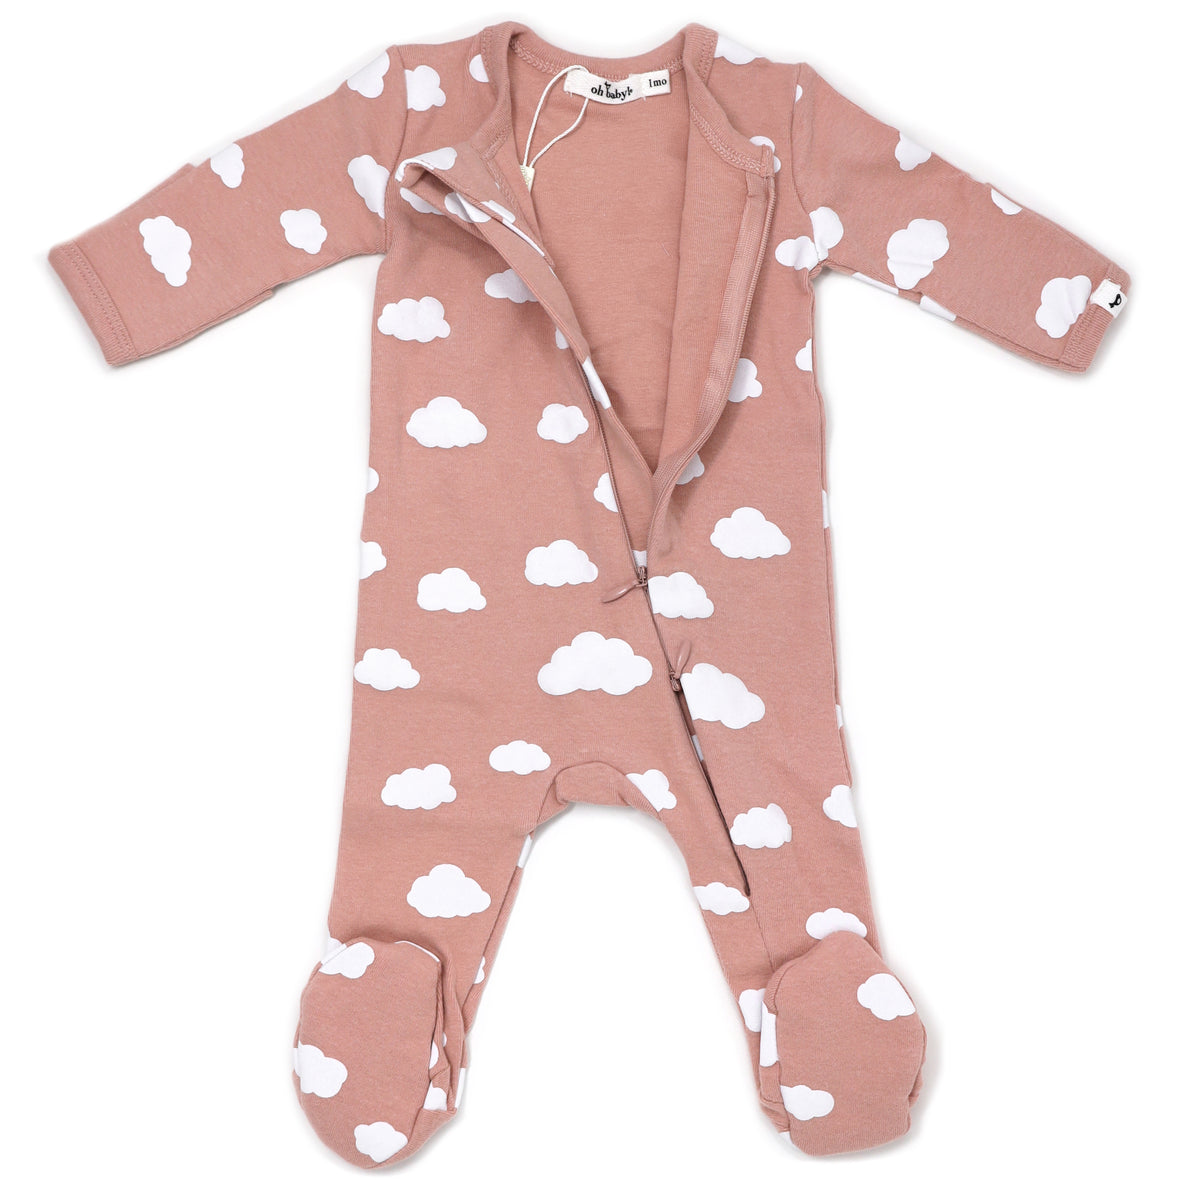 oh baby! Zipper Footie Baby Rib - White Clouds Print - Blush